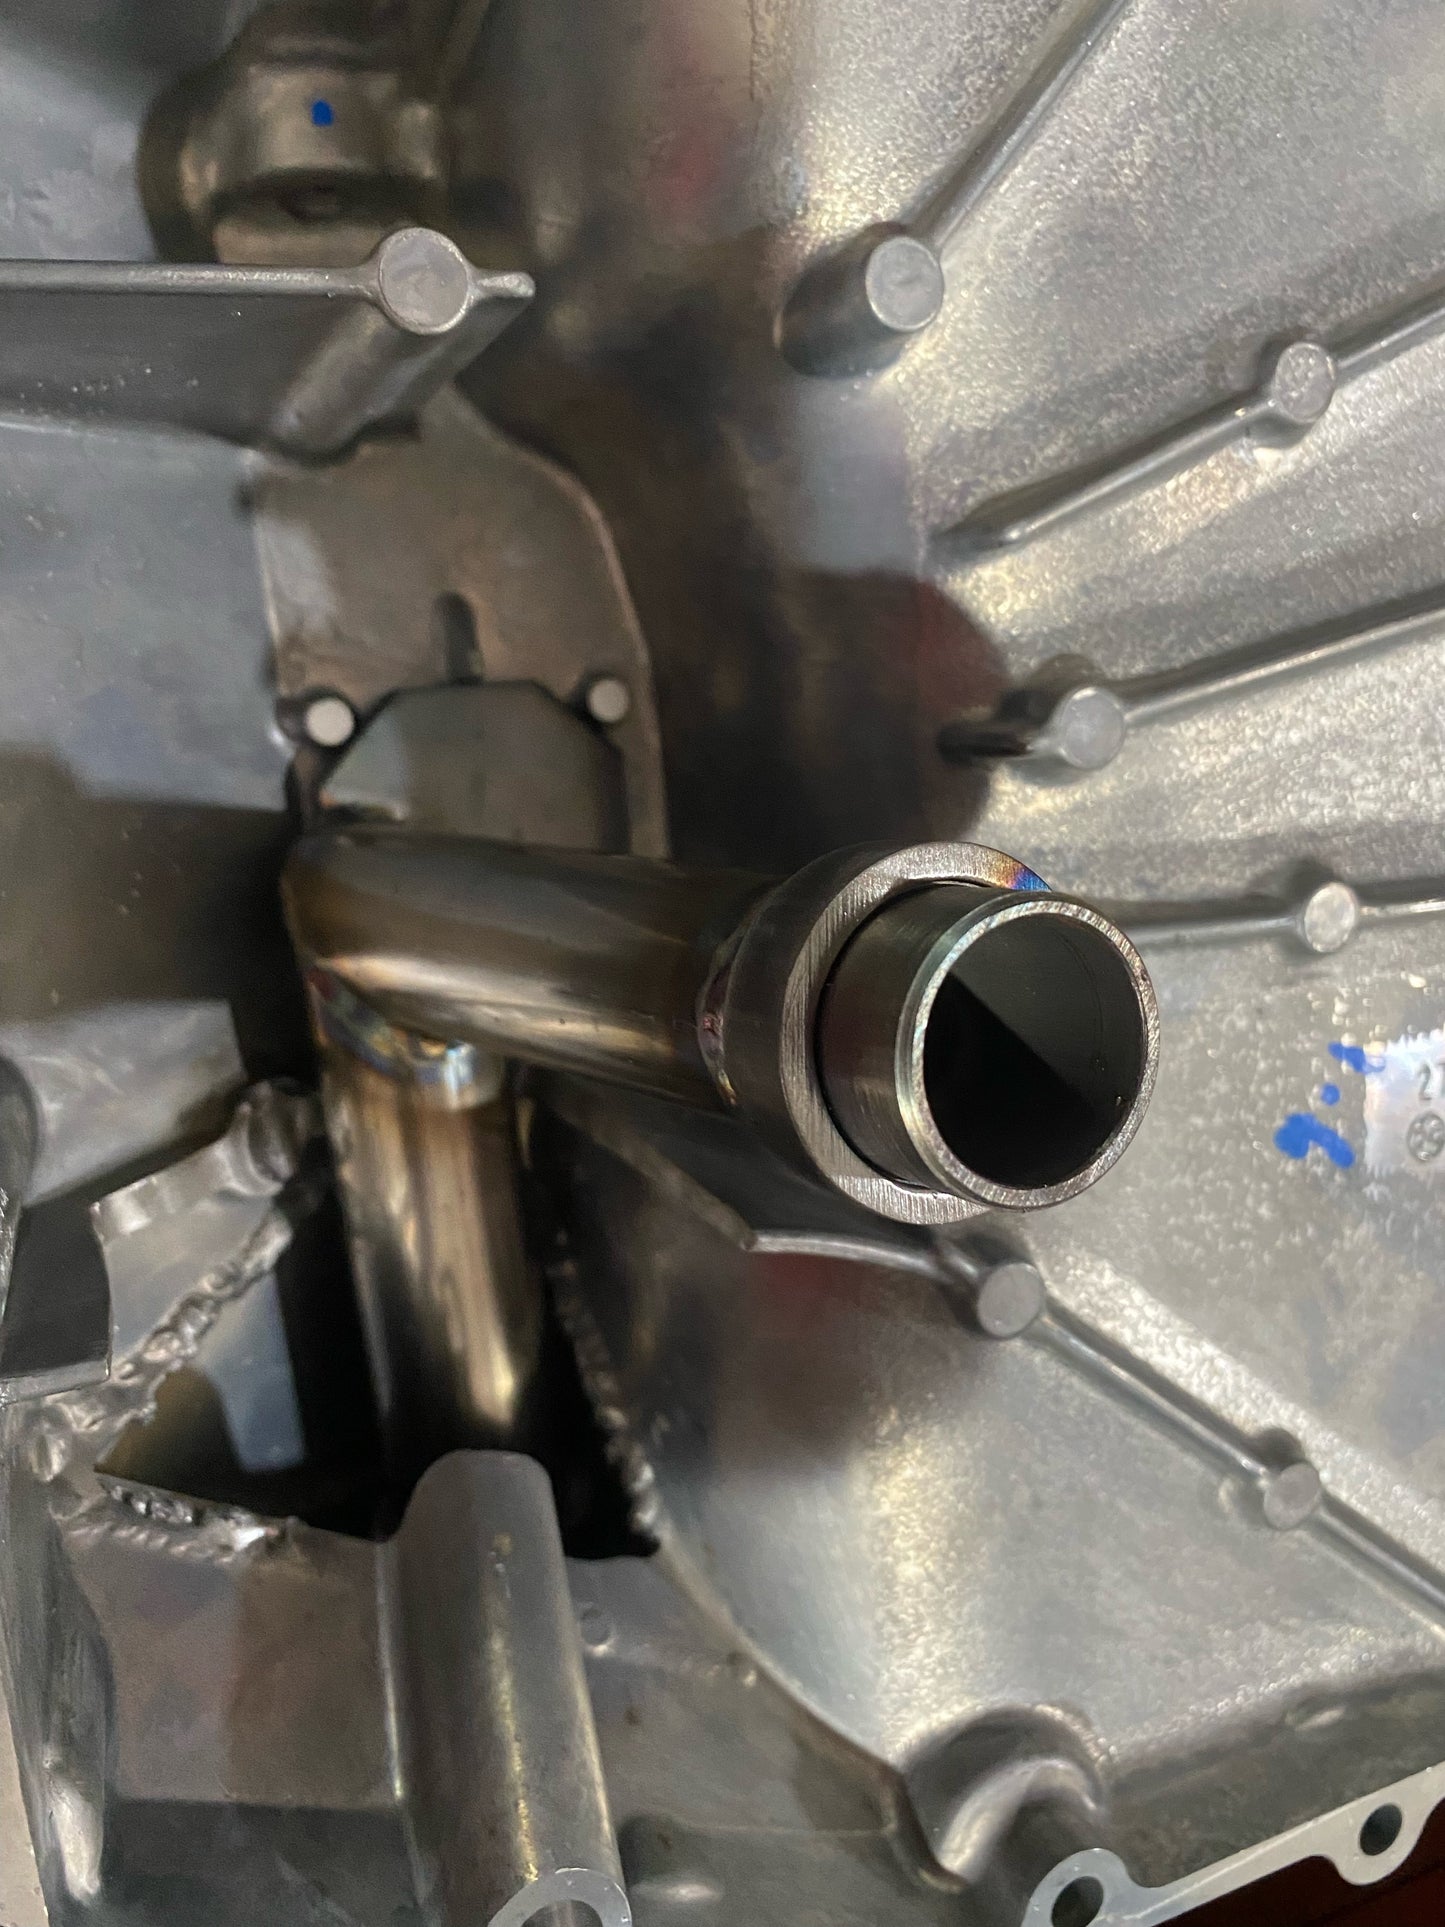 09-24 ZX6 Extended Oil Pan and Pickup Modification